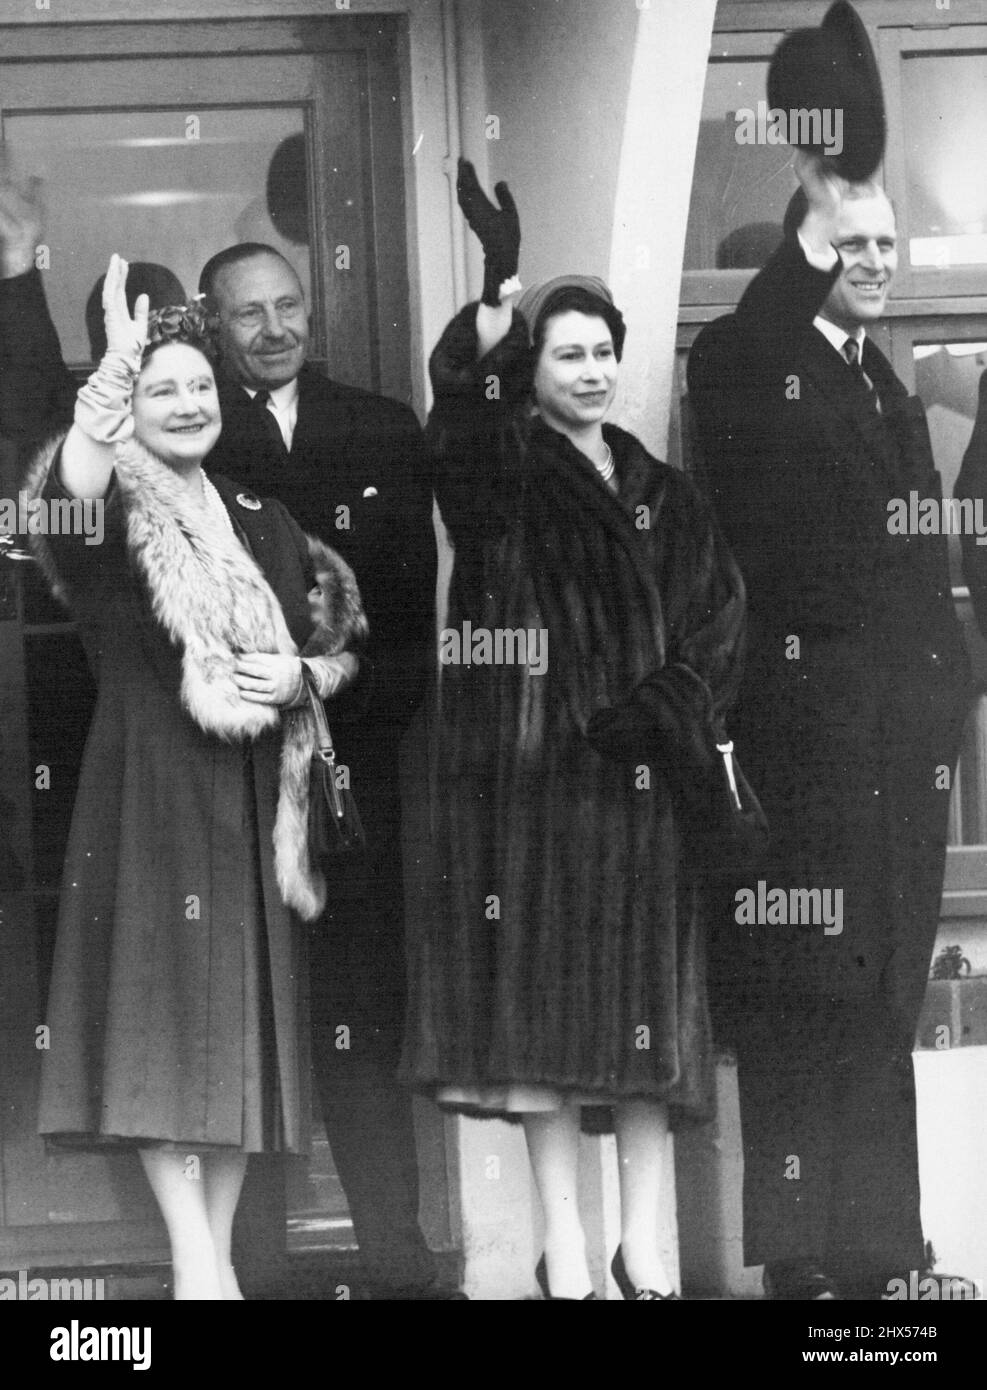 The Queen, the Queen Mother and the Duke of Edinburgh waving goodbye to Princess Margaret at London airport this afternoon. January 31, 1955. (Photo by Daily Mirror). Stock Photo